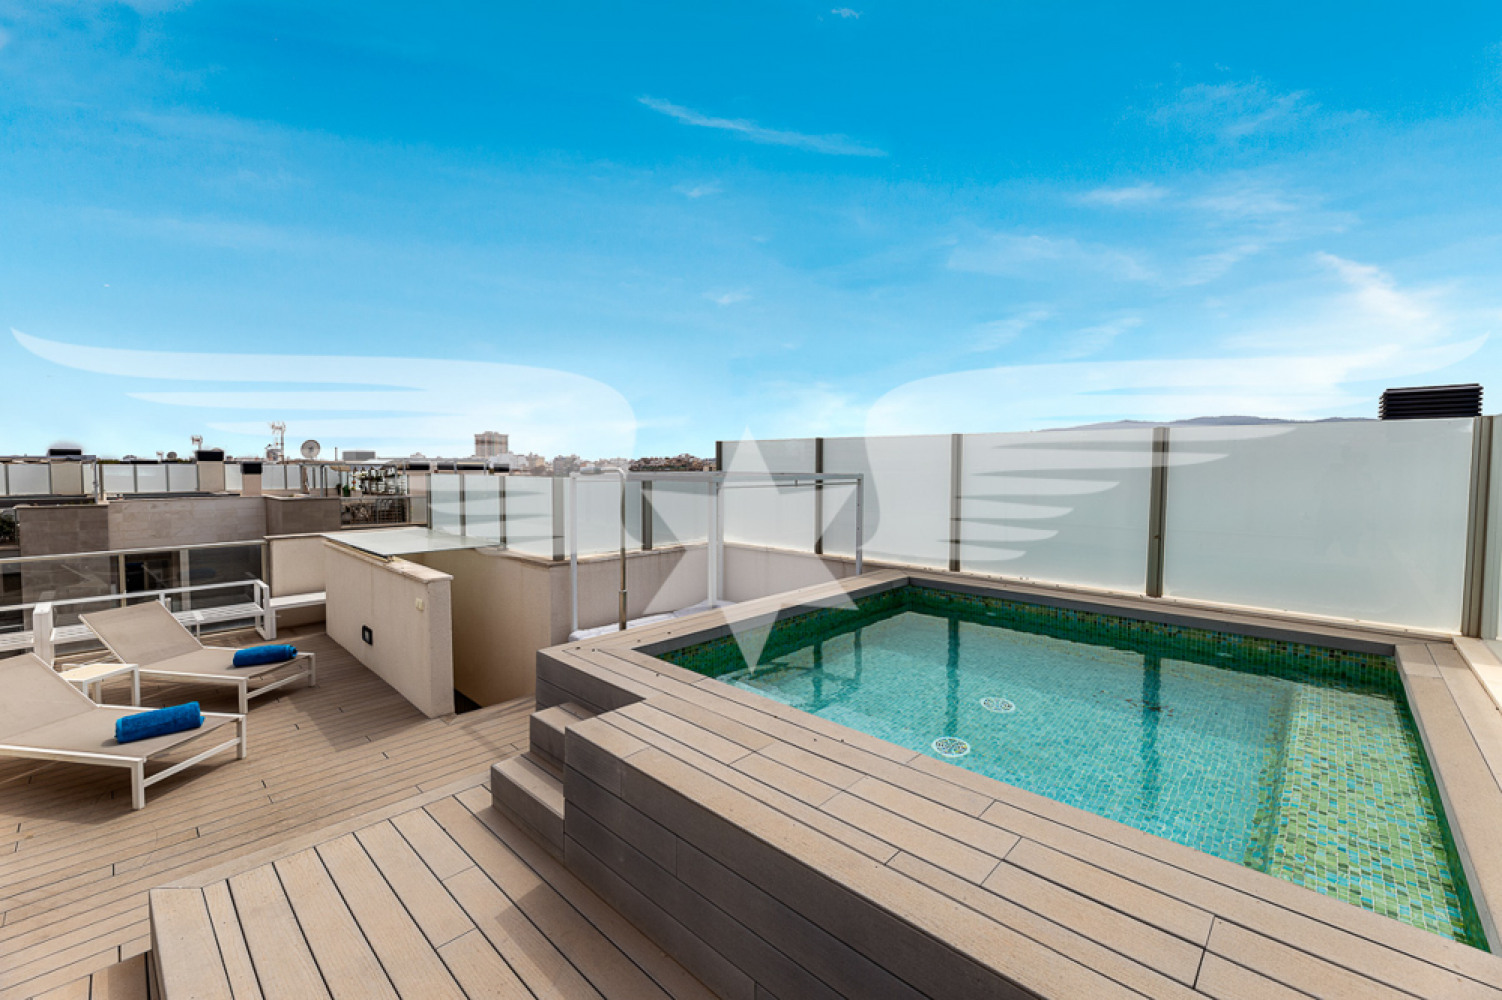 Roof terrace with private pool